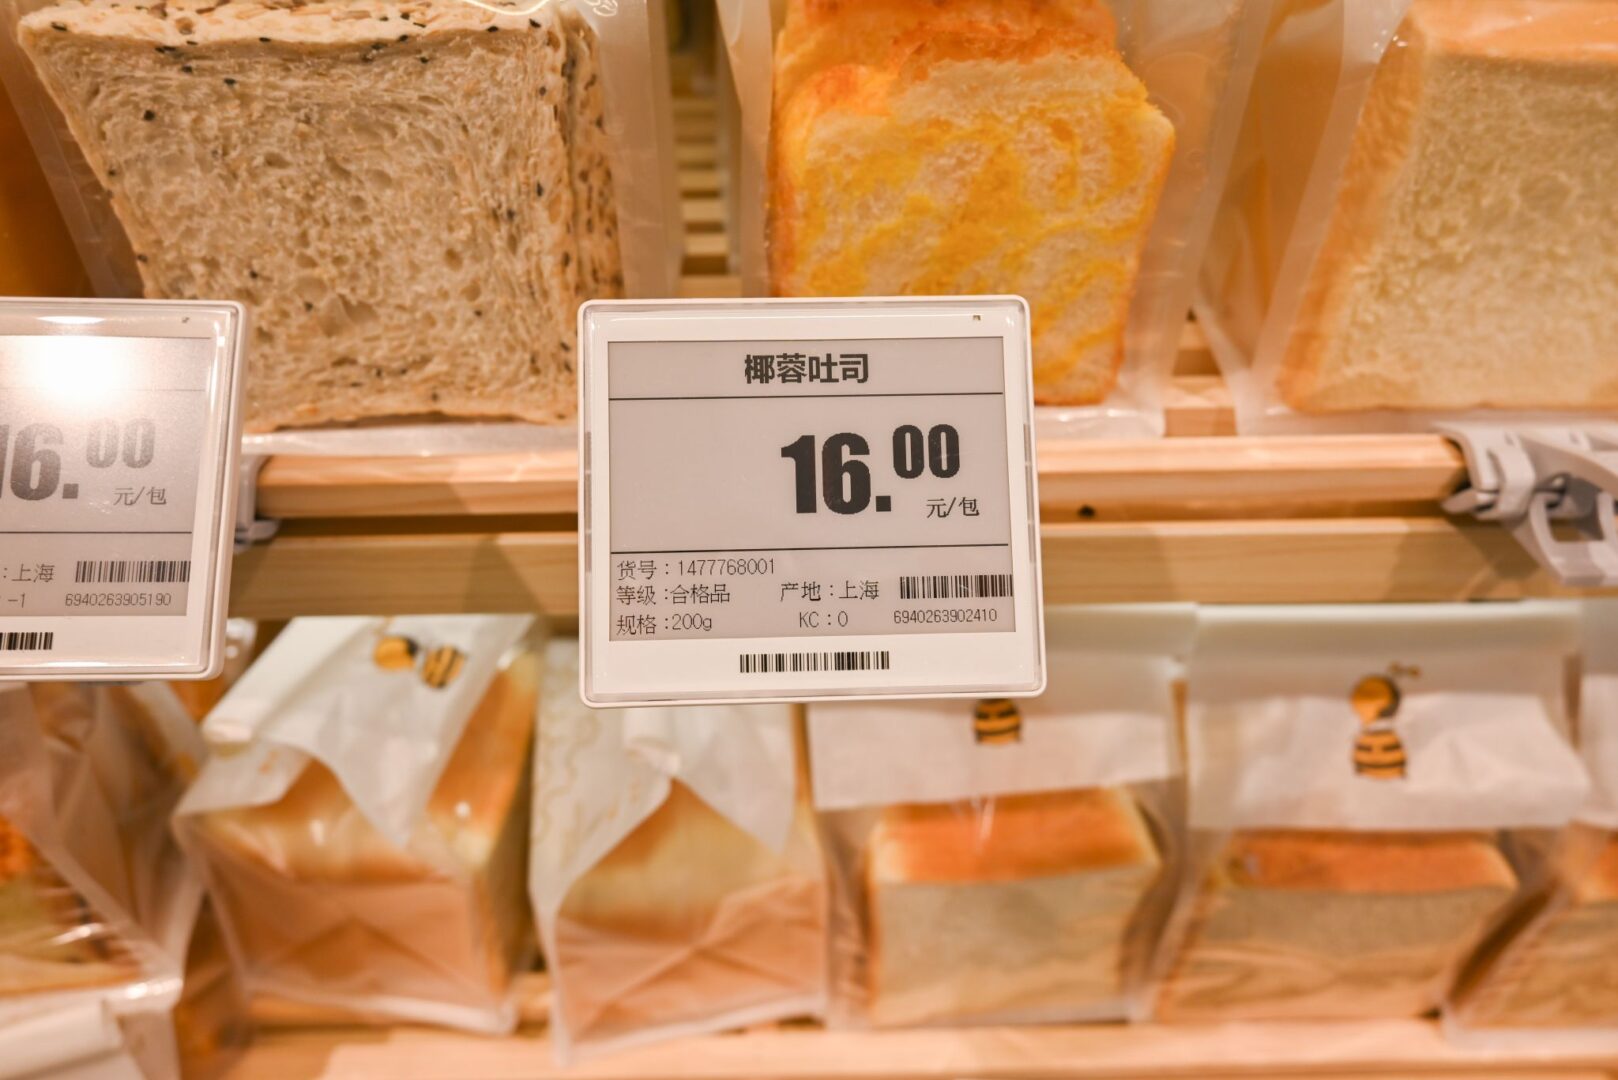 Electronic Shelf Label Market Size and Solutions for Retail插图